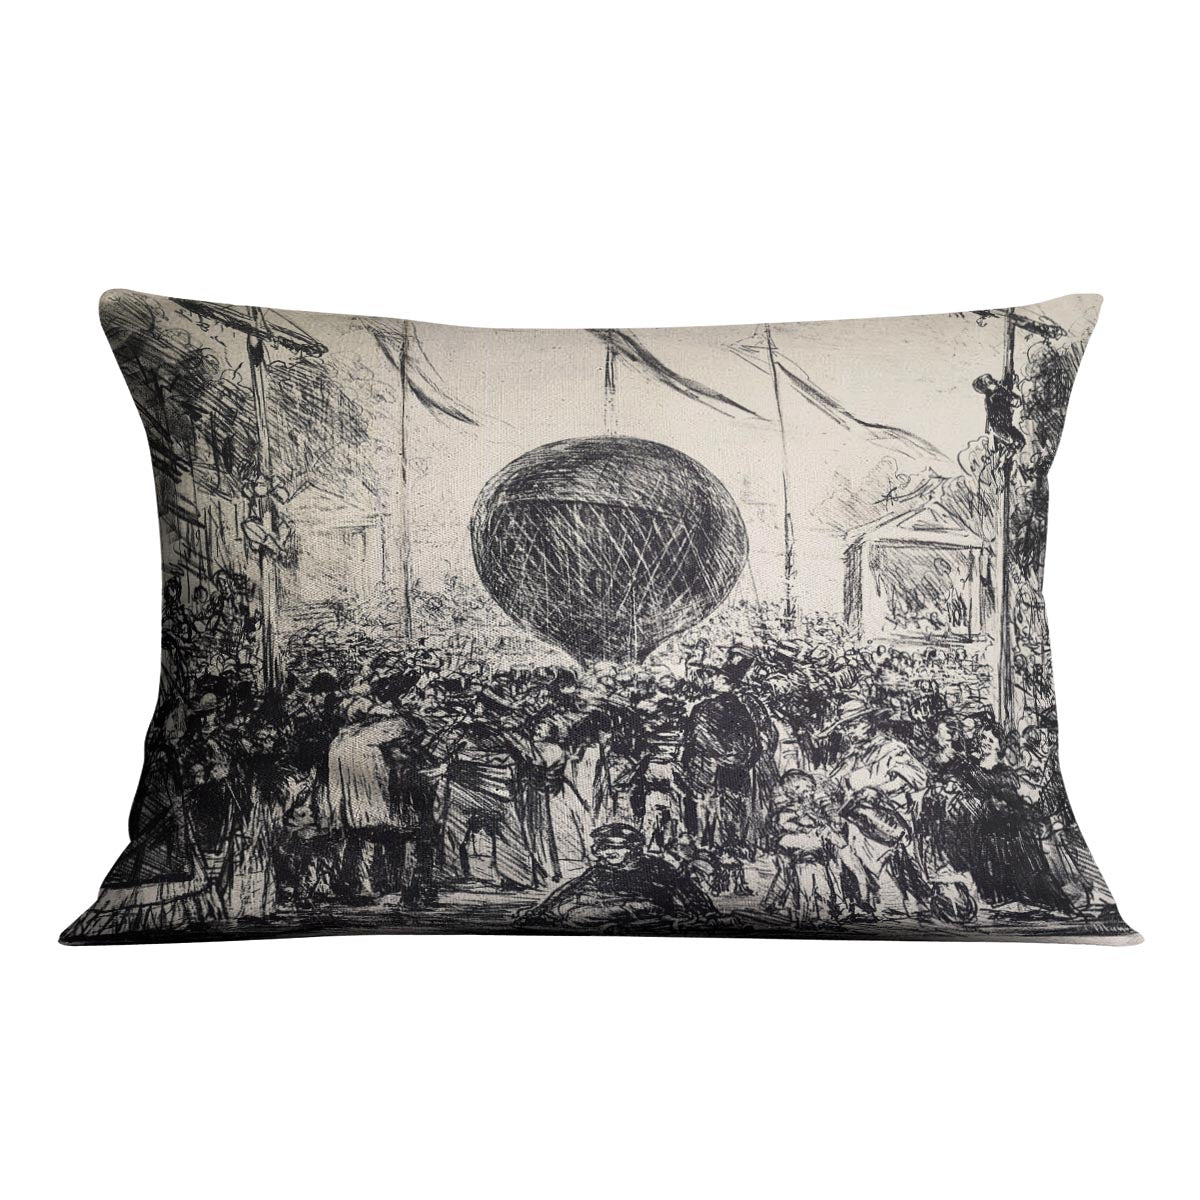 The Balloon by Manet Cushion